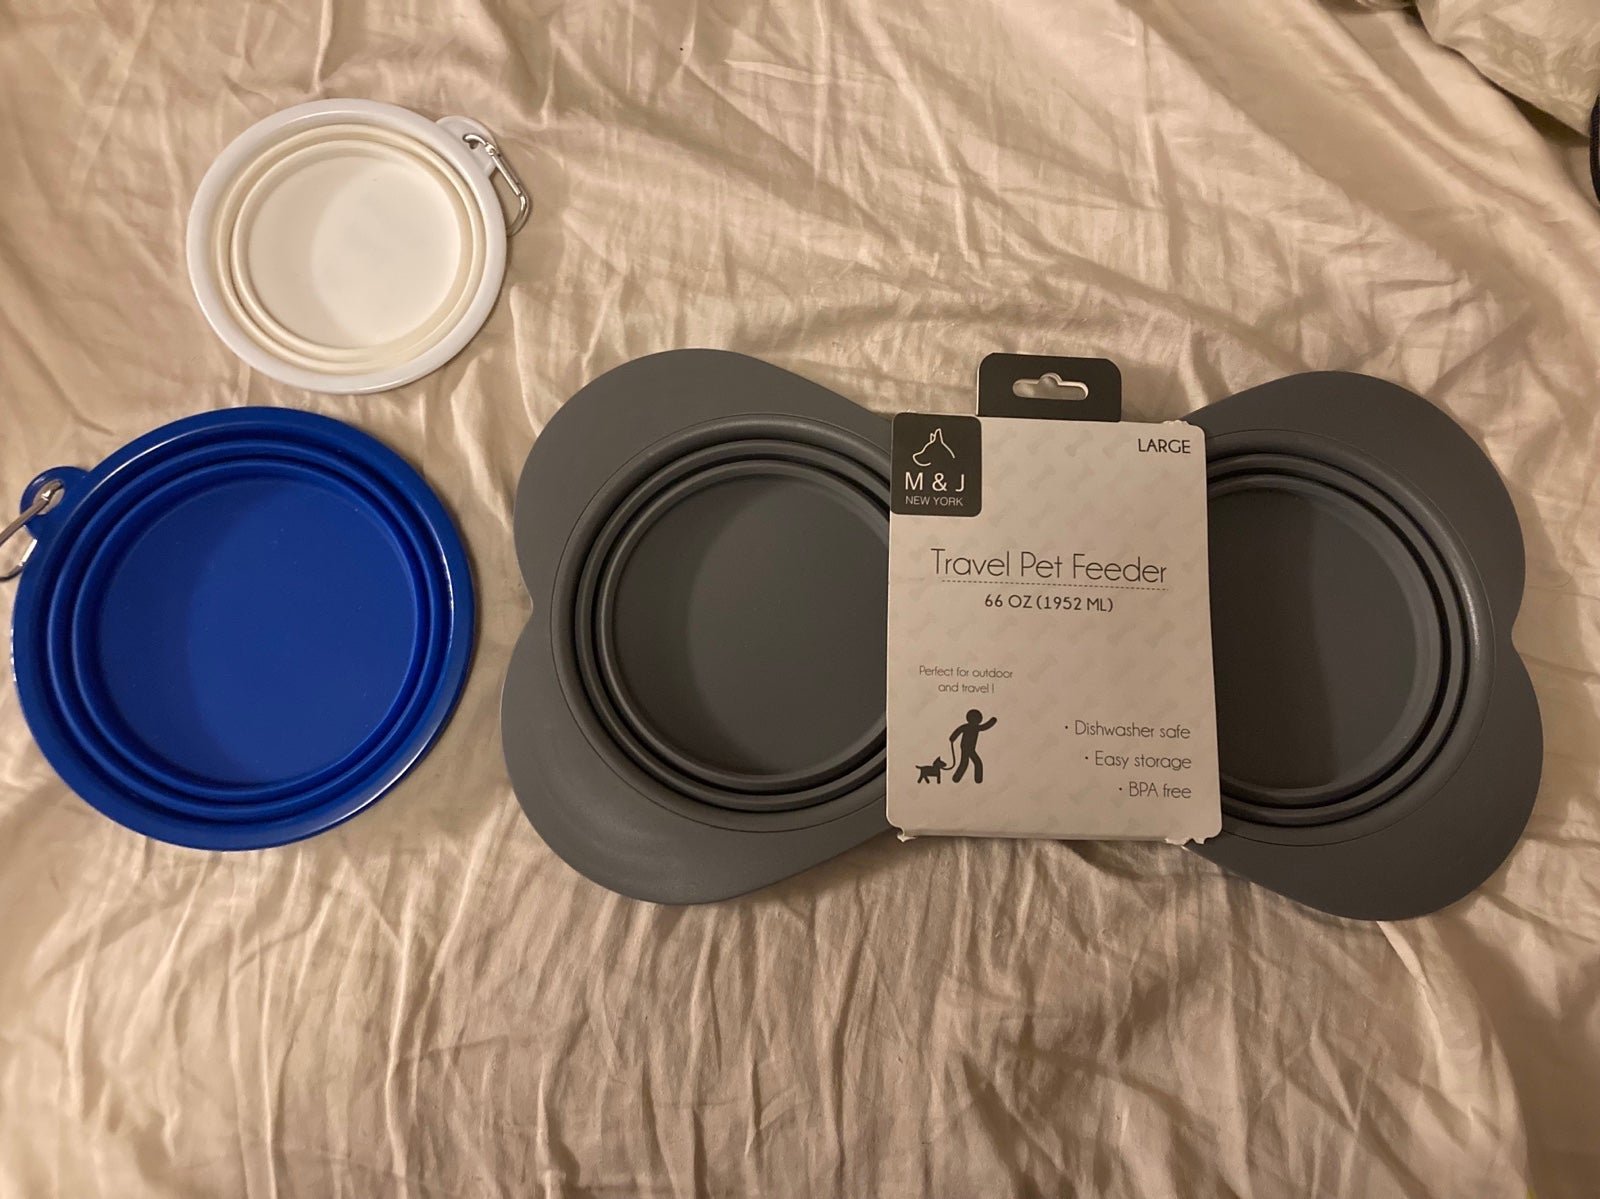 Set of collapsible dog bowls new RESERVED 7GpeNo6KV